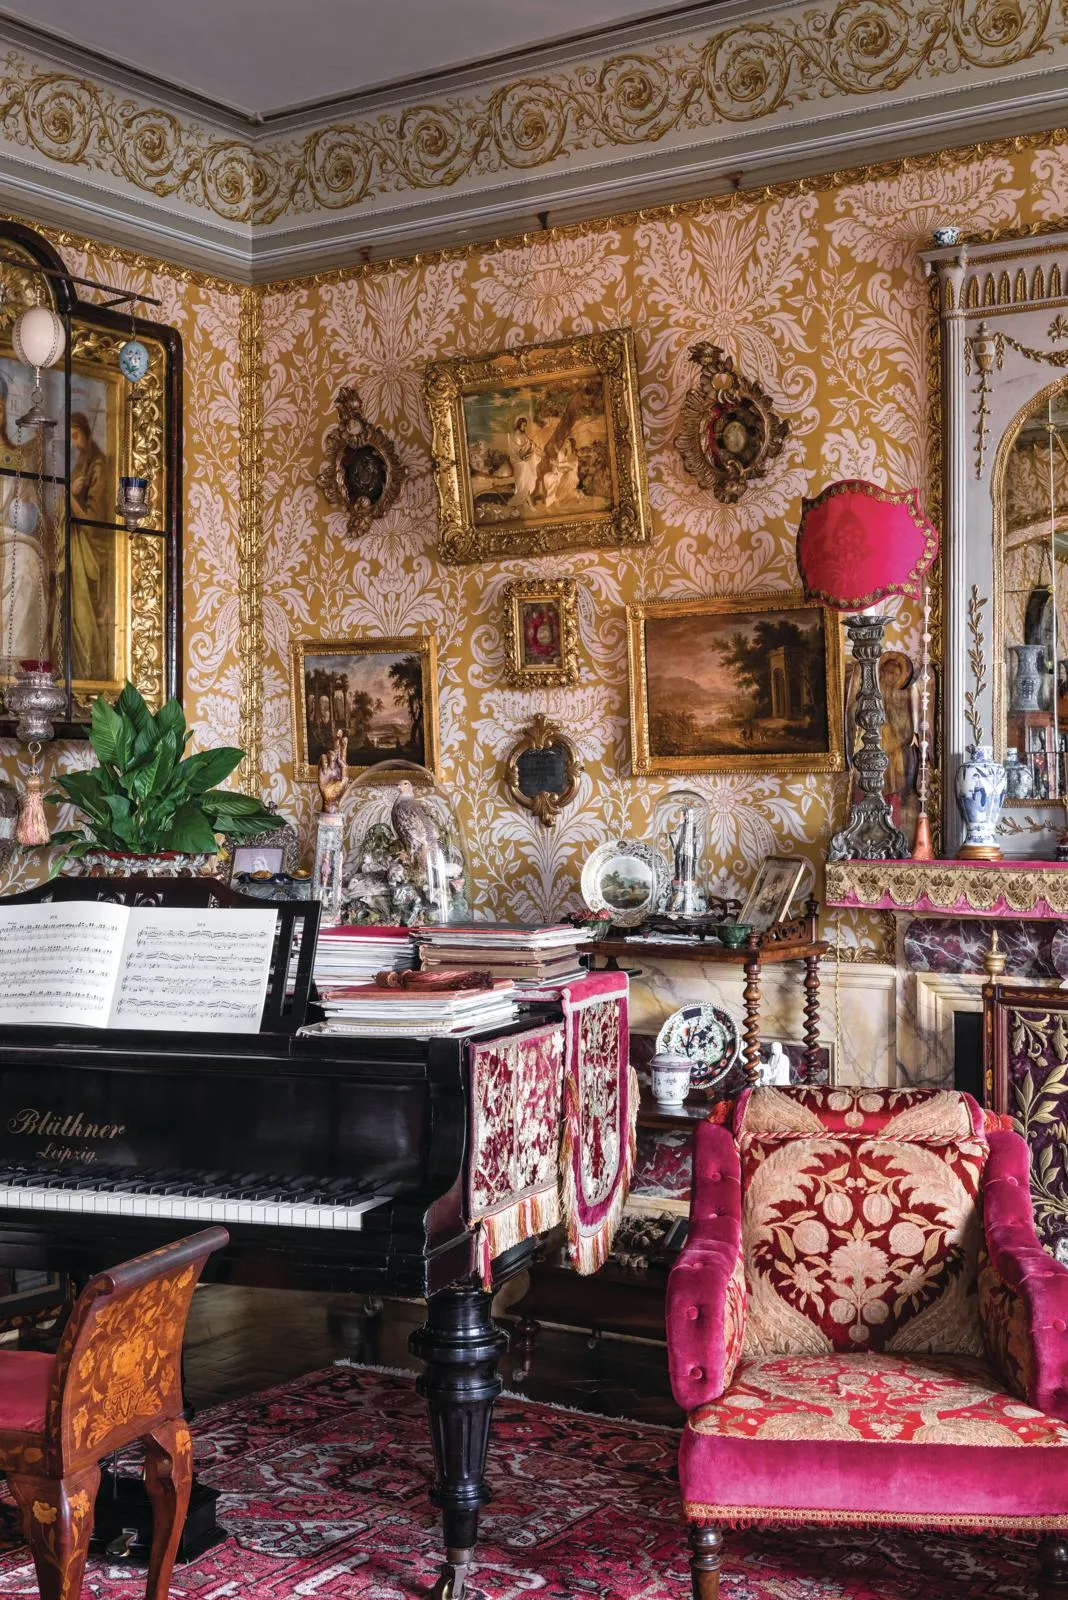 Hasting B&B piano in the drawing room